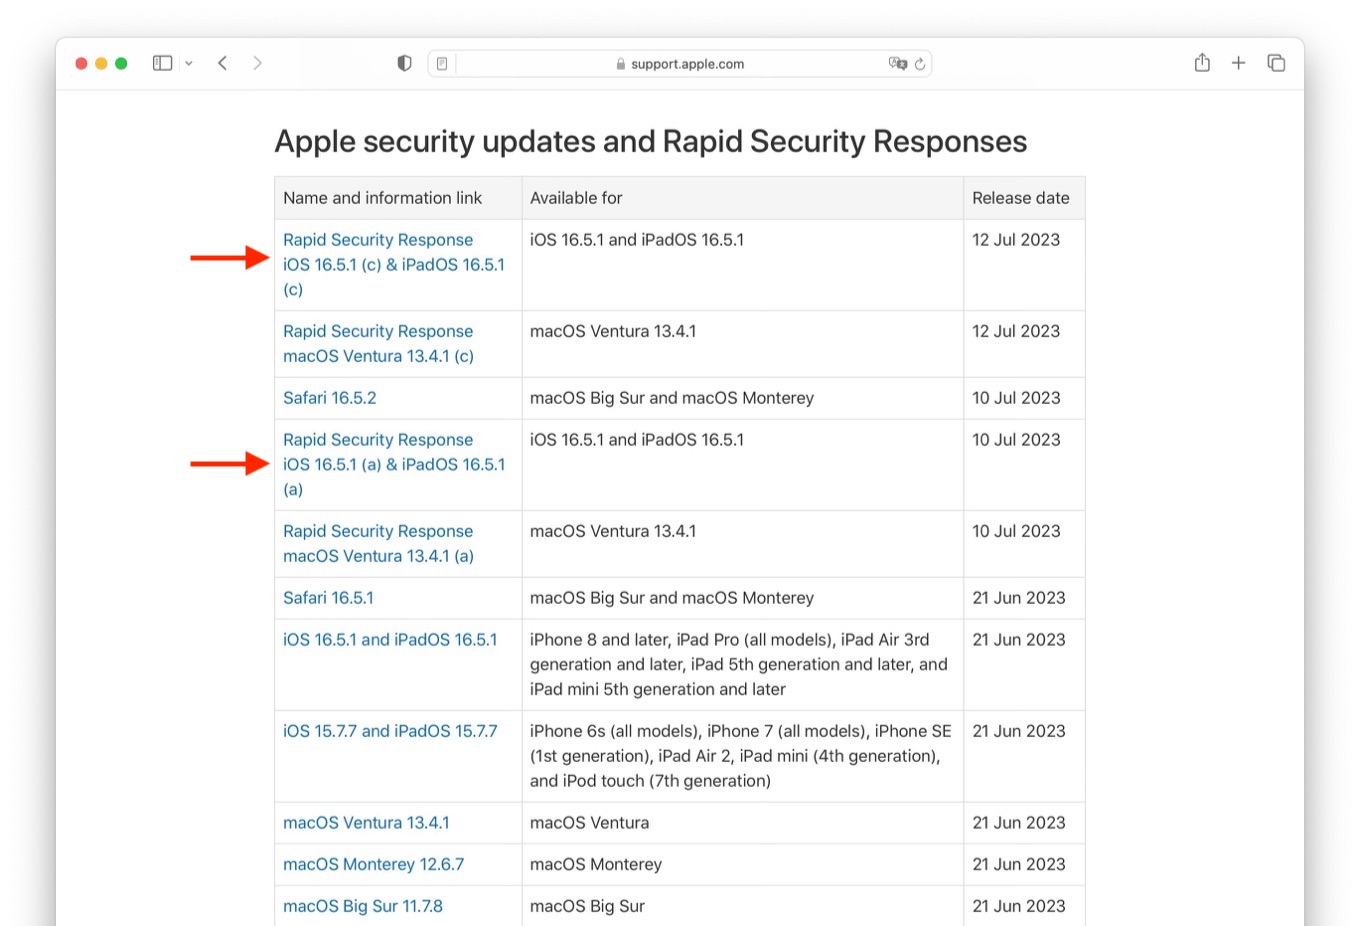 20230719-Apple security updates and Rapid Security Responses